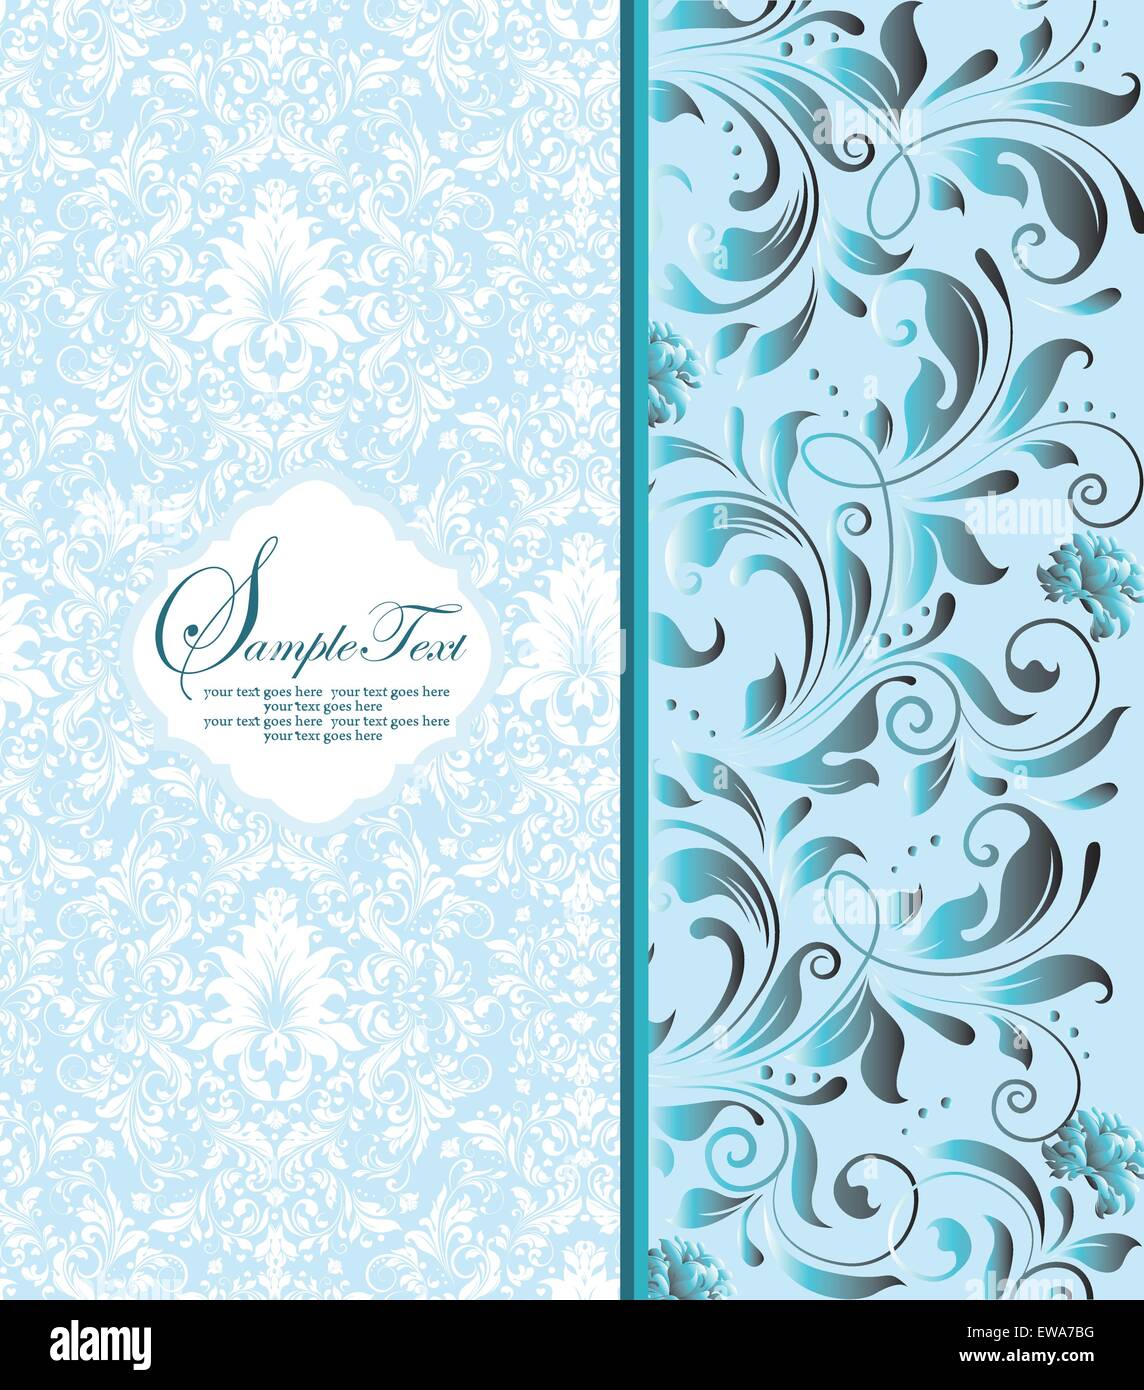 Vintage invitation card with ornate elegant retro abstract floral design,  gray and light blue flowers and leaves on pale blue and white background.  Vector illustration Stock Vector Image & Art - Alamy